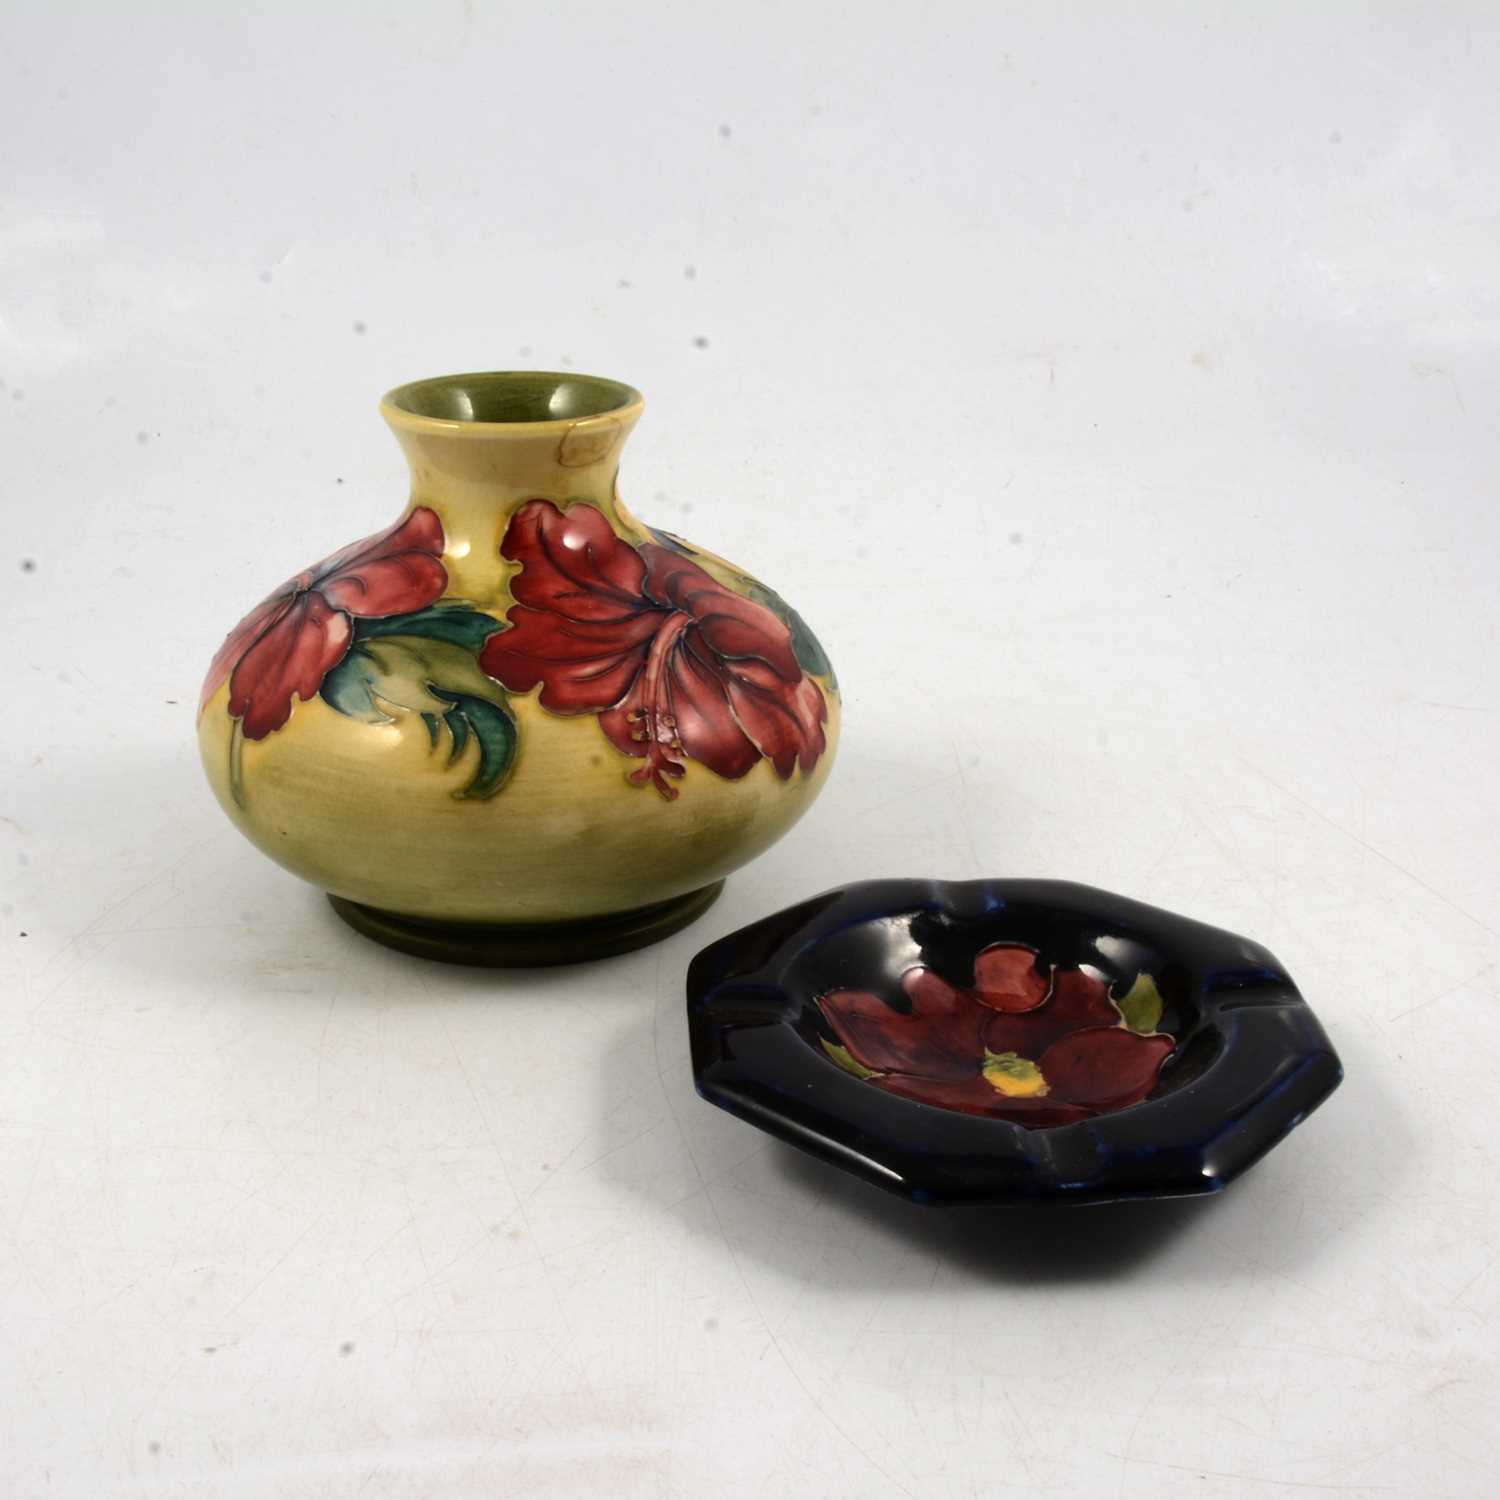 Lot 39 - Moorcroft Pottery, Hibiscus pattern squat vase, and a small ashtray dish